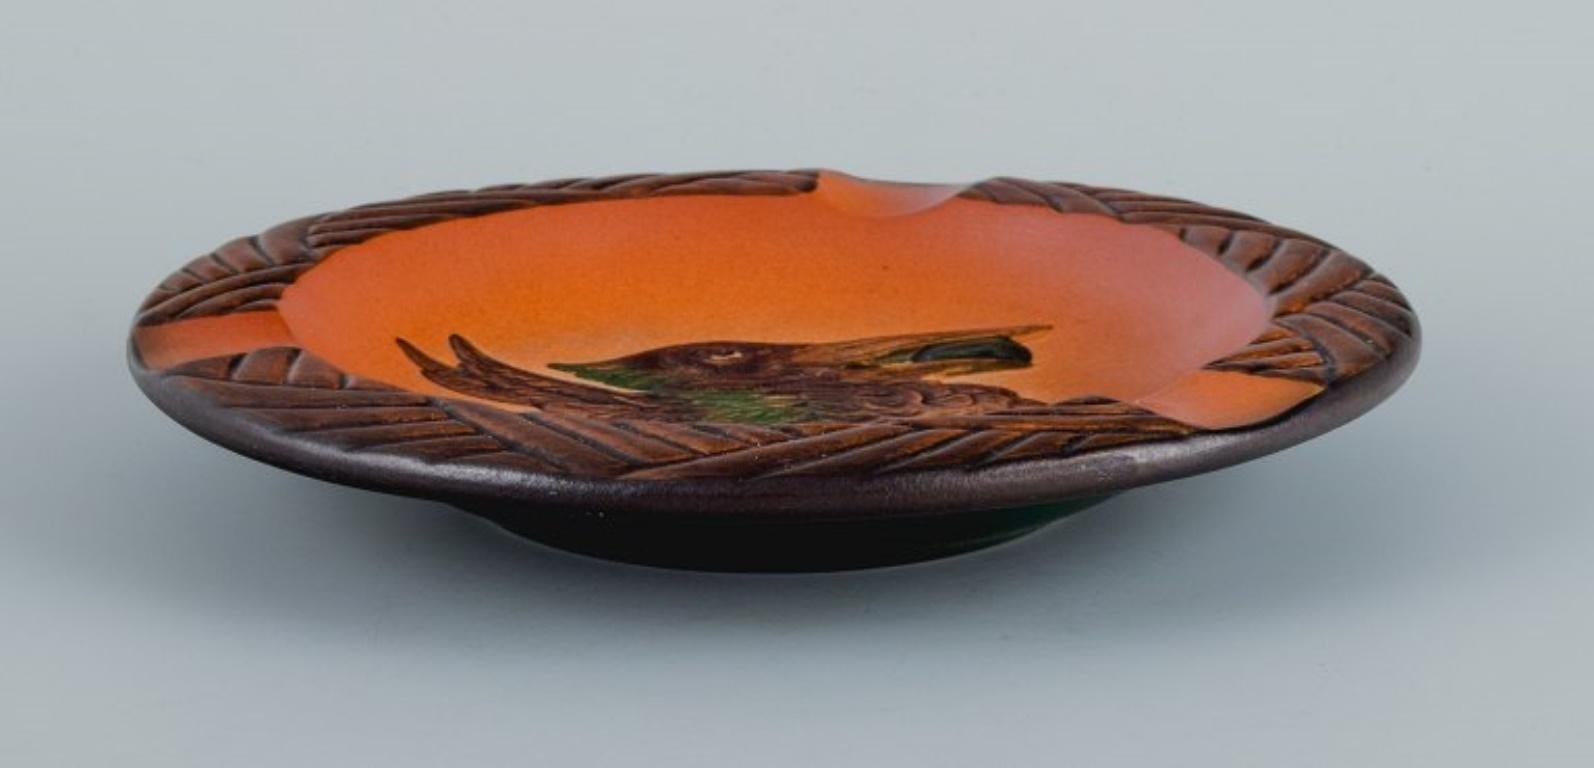 Ipsen's, Denmark. Bowl with bird and glaze in shades of orange-green.
Model number 10.
1920s-1930s.
In excellent condition.
Marked.
Dimensions: D 18.0 x H 2.5 cm.